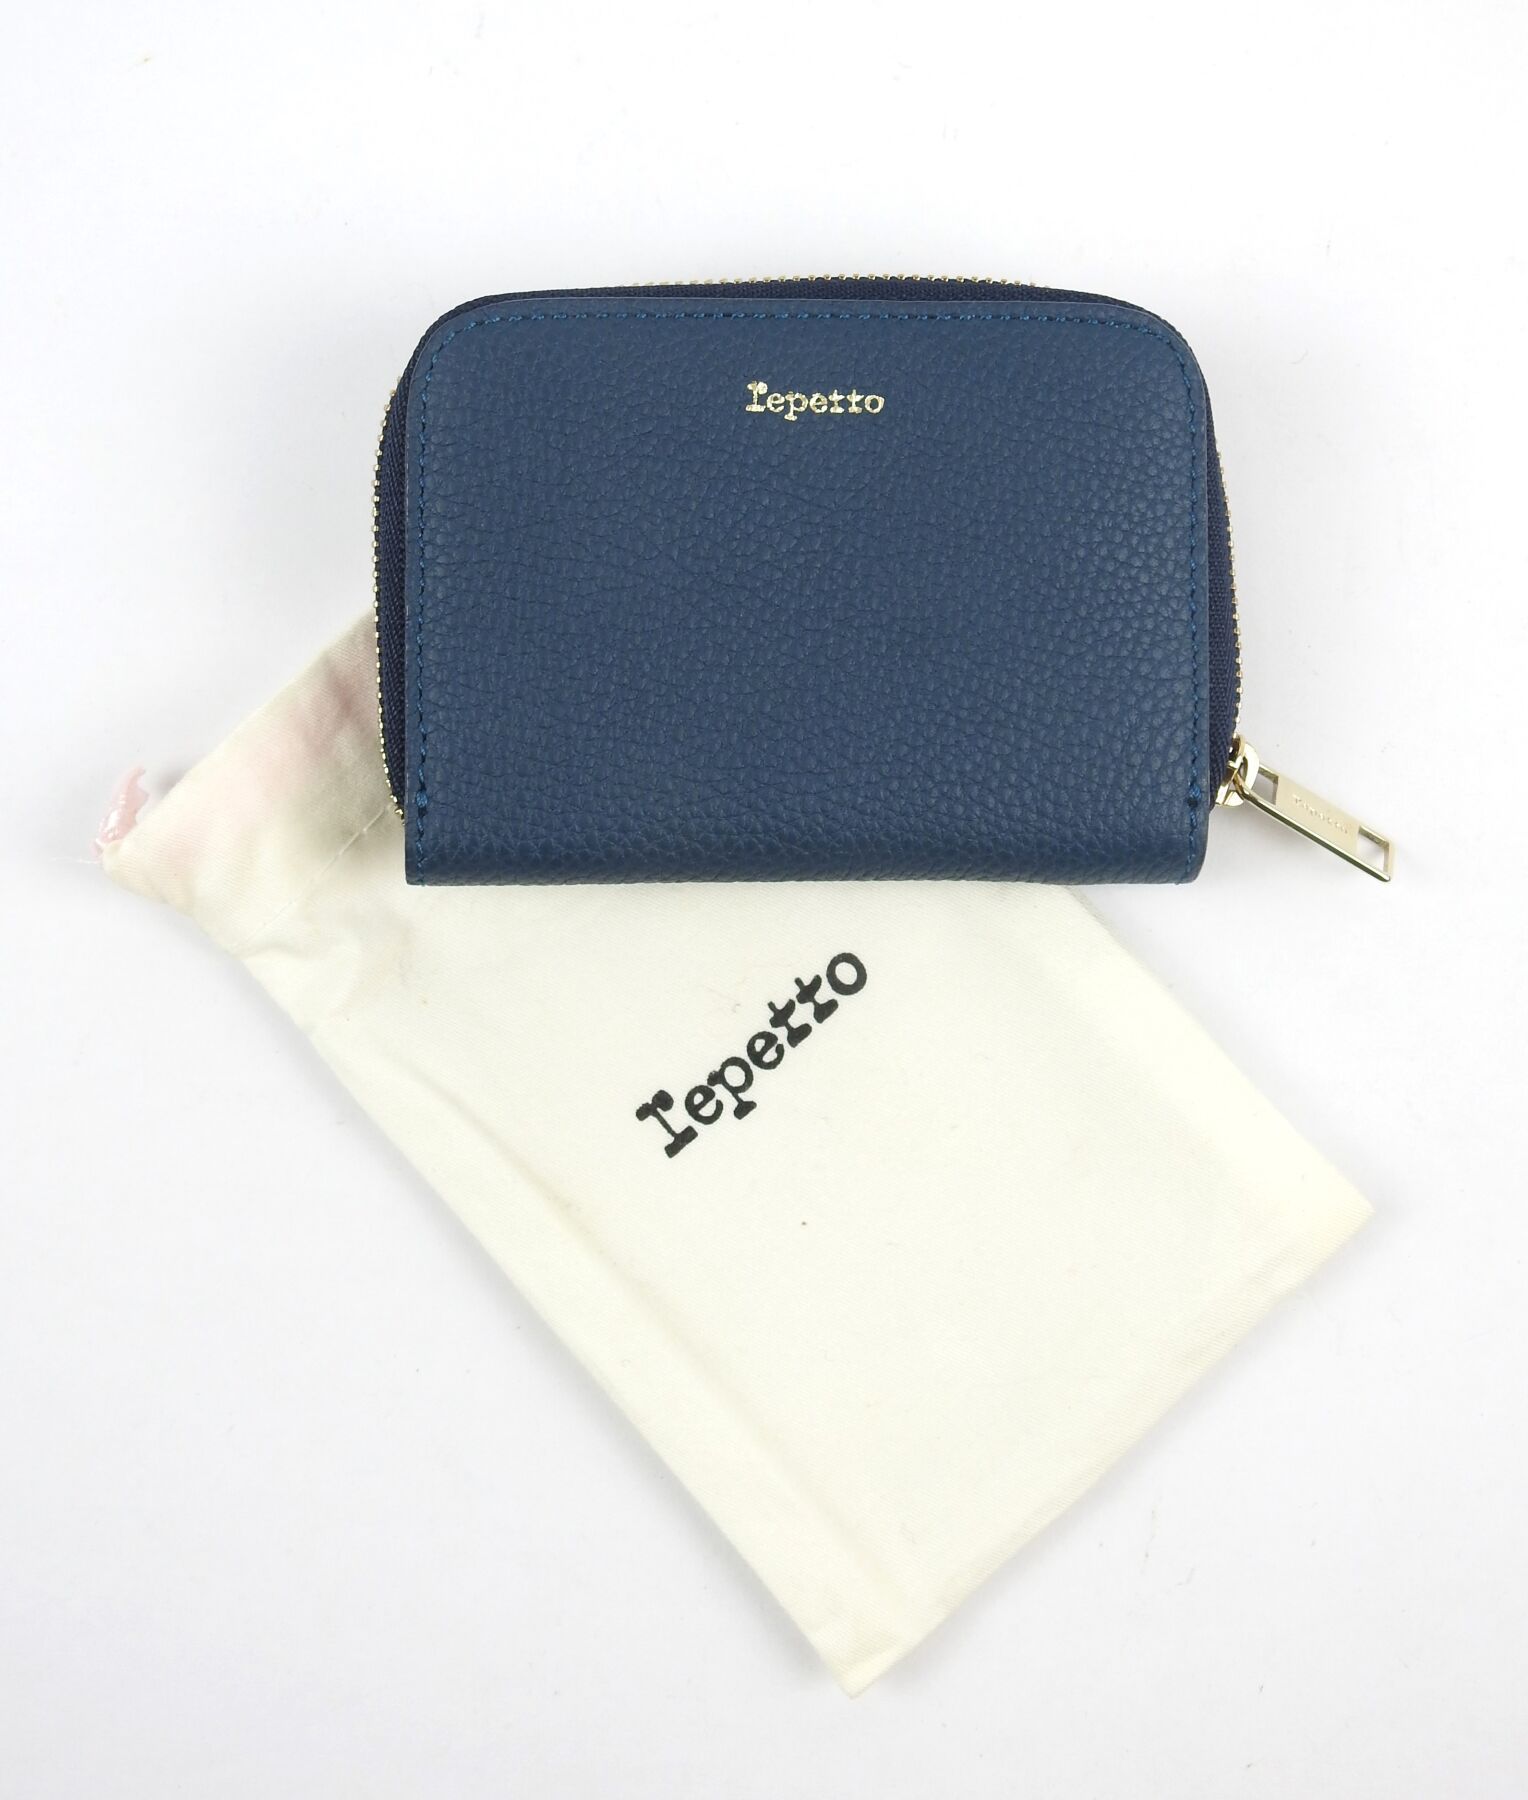 Null LEPETTO. Purse in blue grained leather. With its pouch.